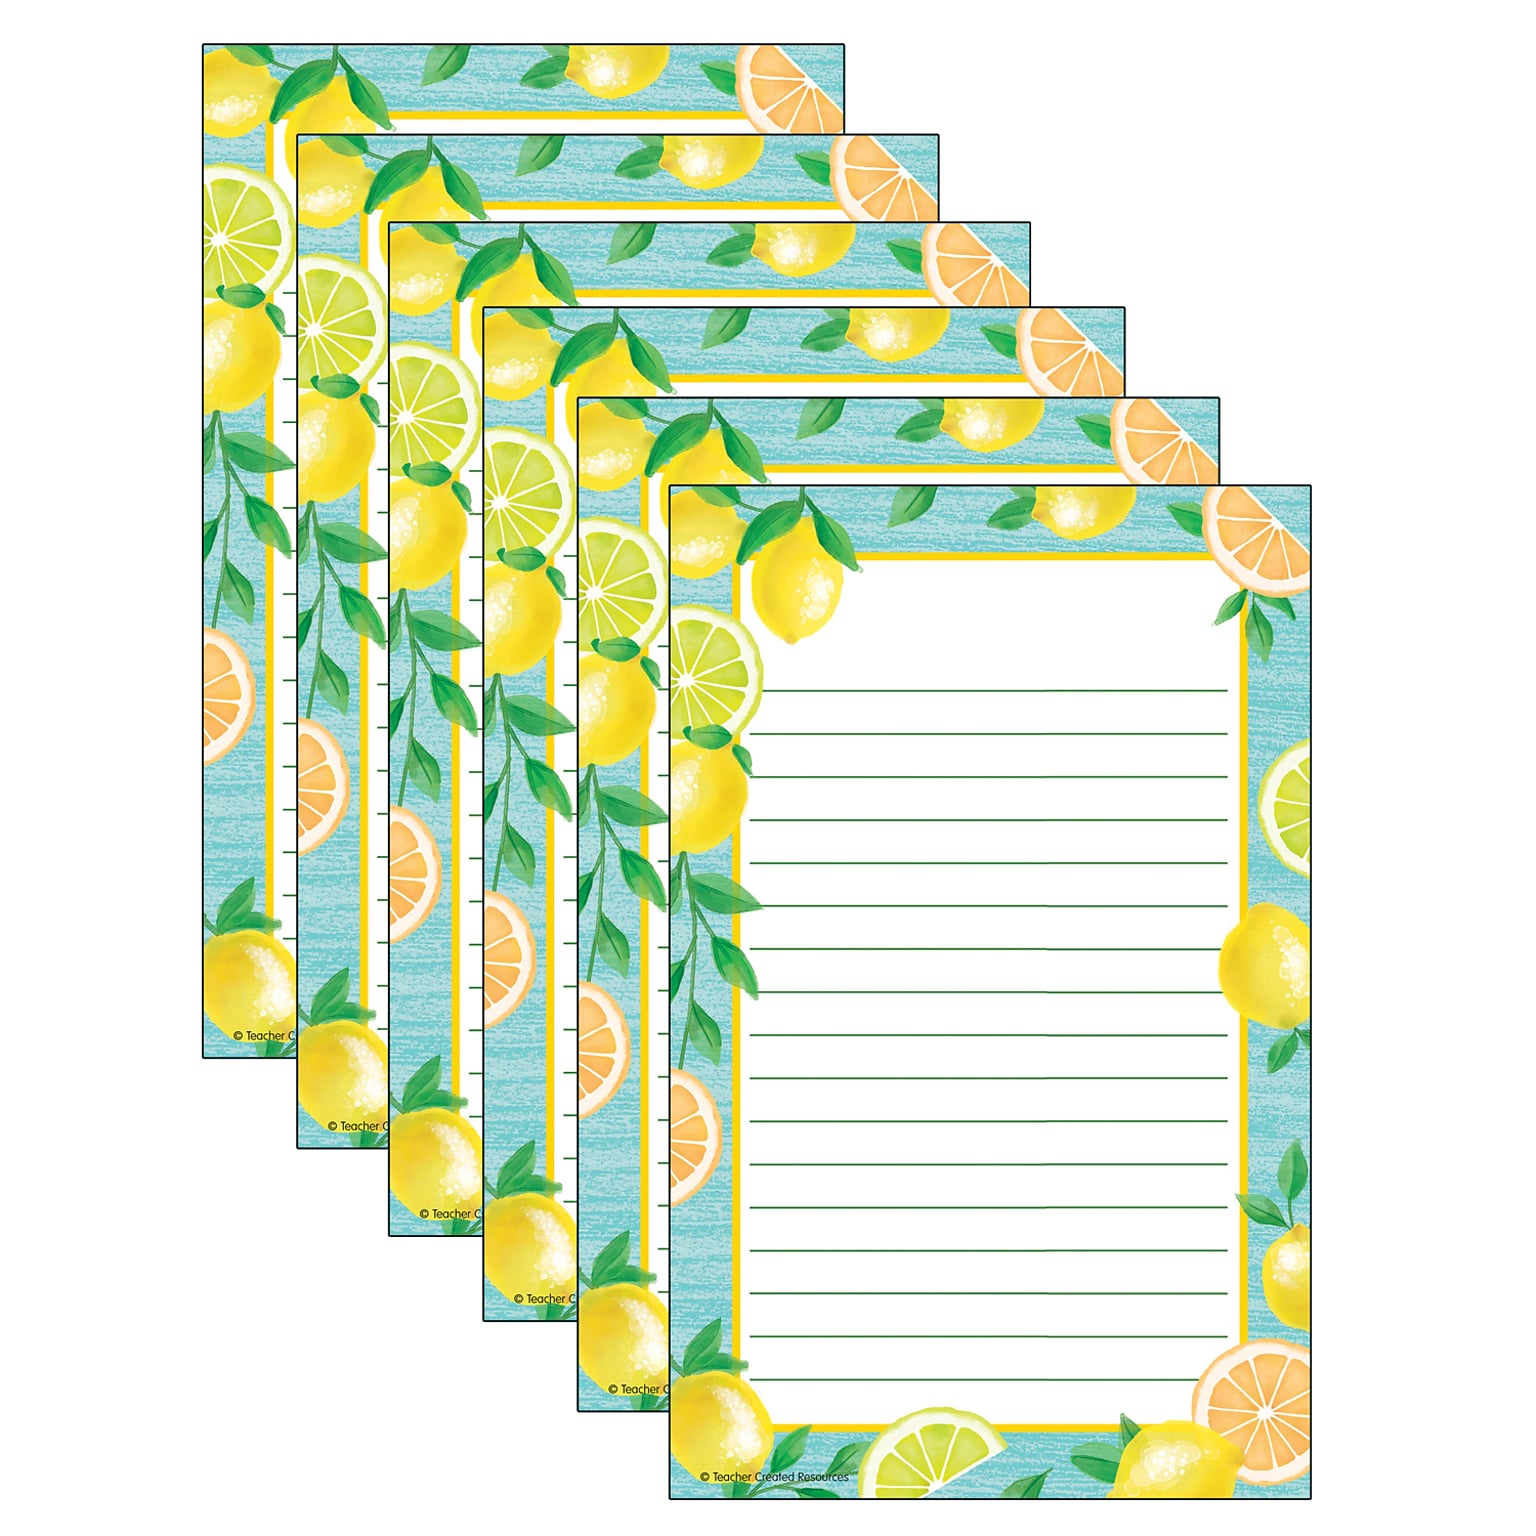 Teacher Created Resources® Note Pad, 5.25 x 8.5, 50 Sheets Per Pad, Lemon Zest, Pack of 6 (TCR8493-6)